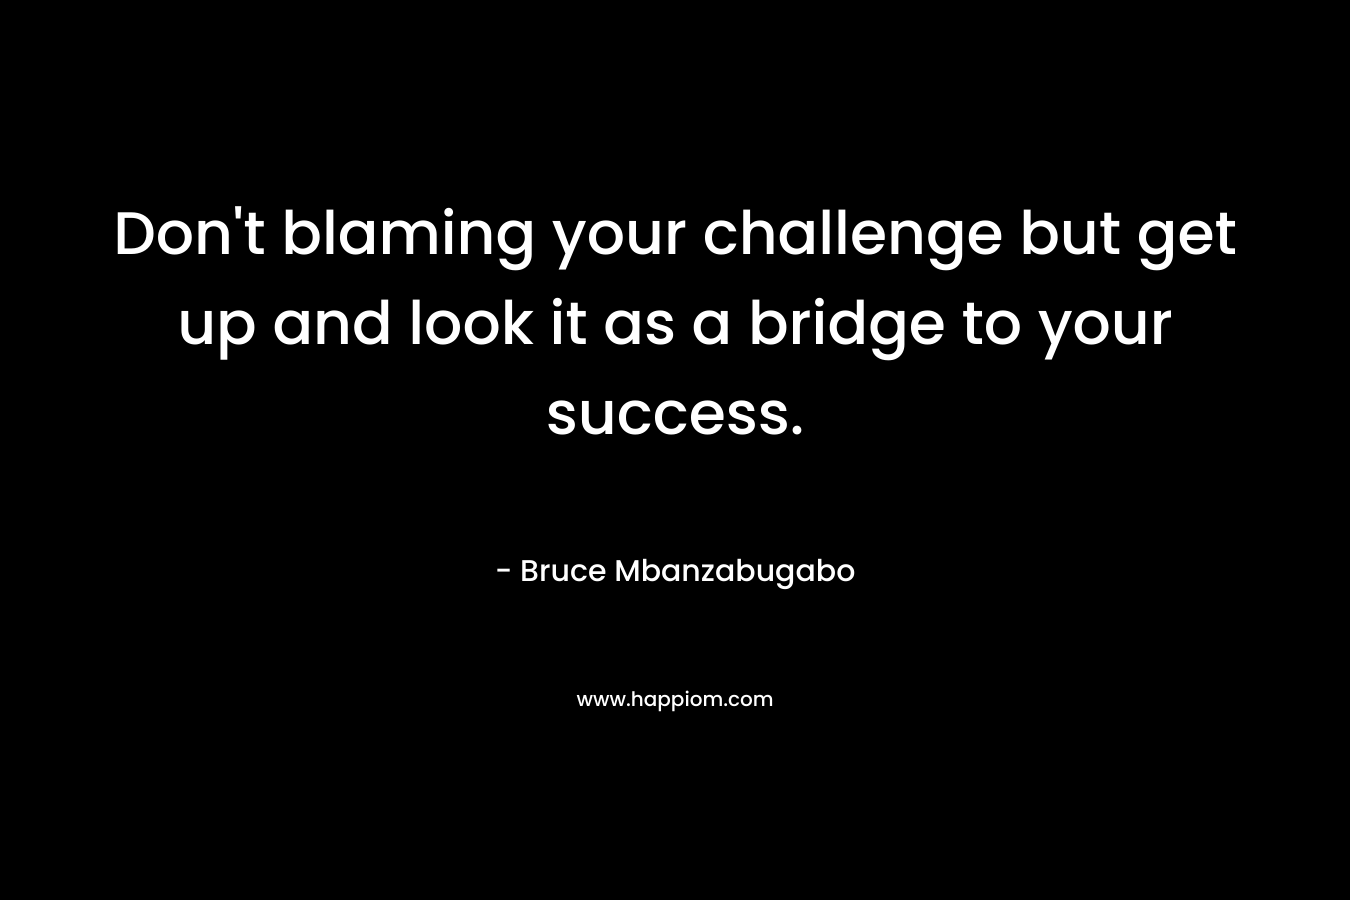 Don’t blaming your challenge but get up and look it as a bridge to your success. – Bruce Mbanzabugabo